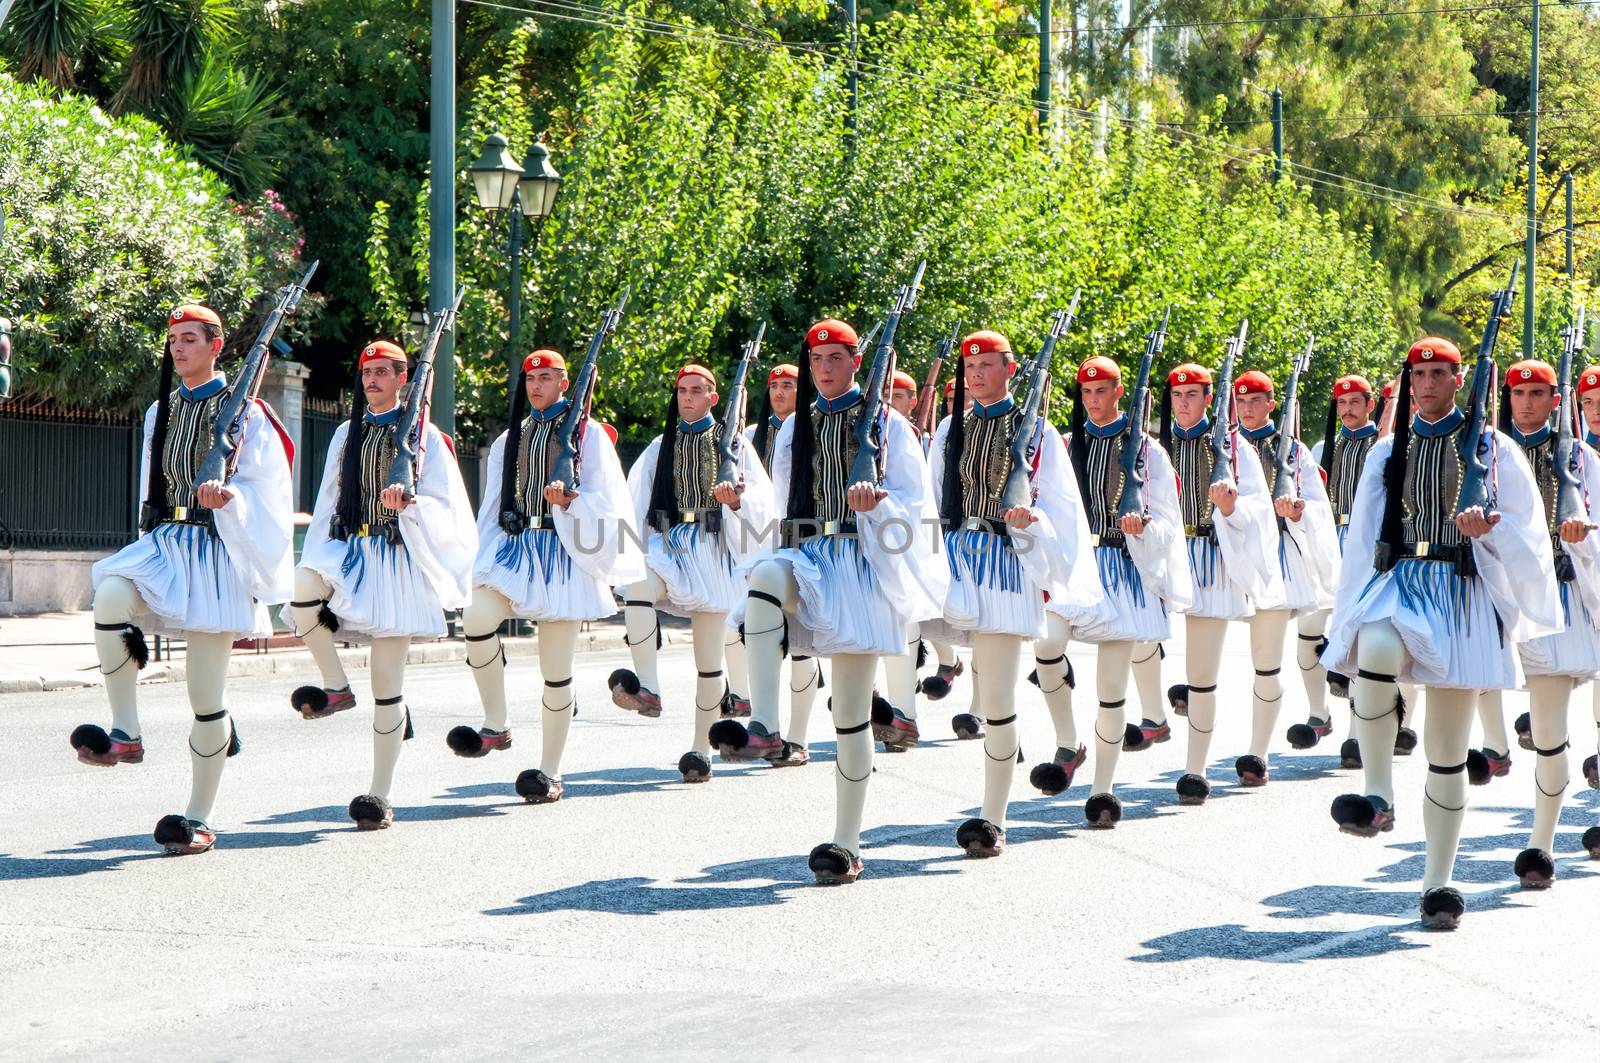 The Evzones is a special unit of the Hellenic Army who guard the Monument of the Unknown Soldier.